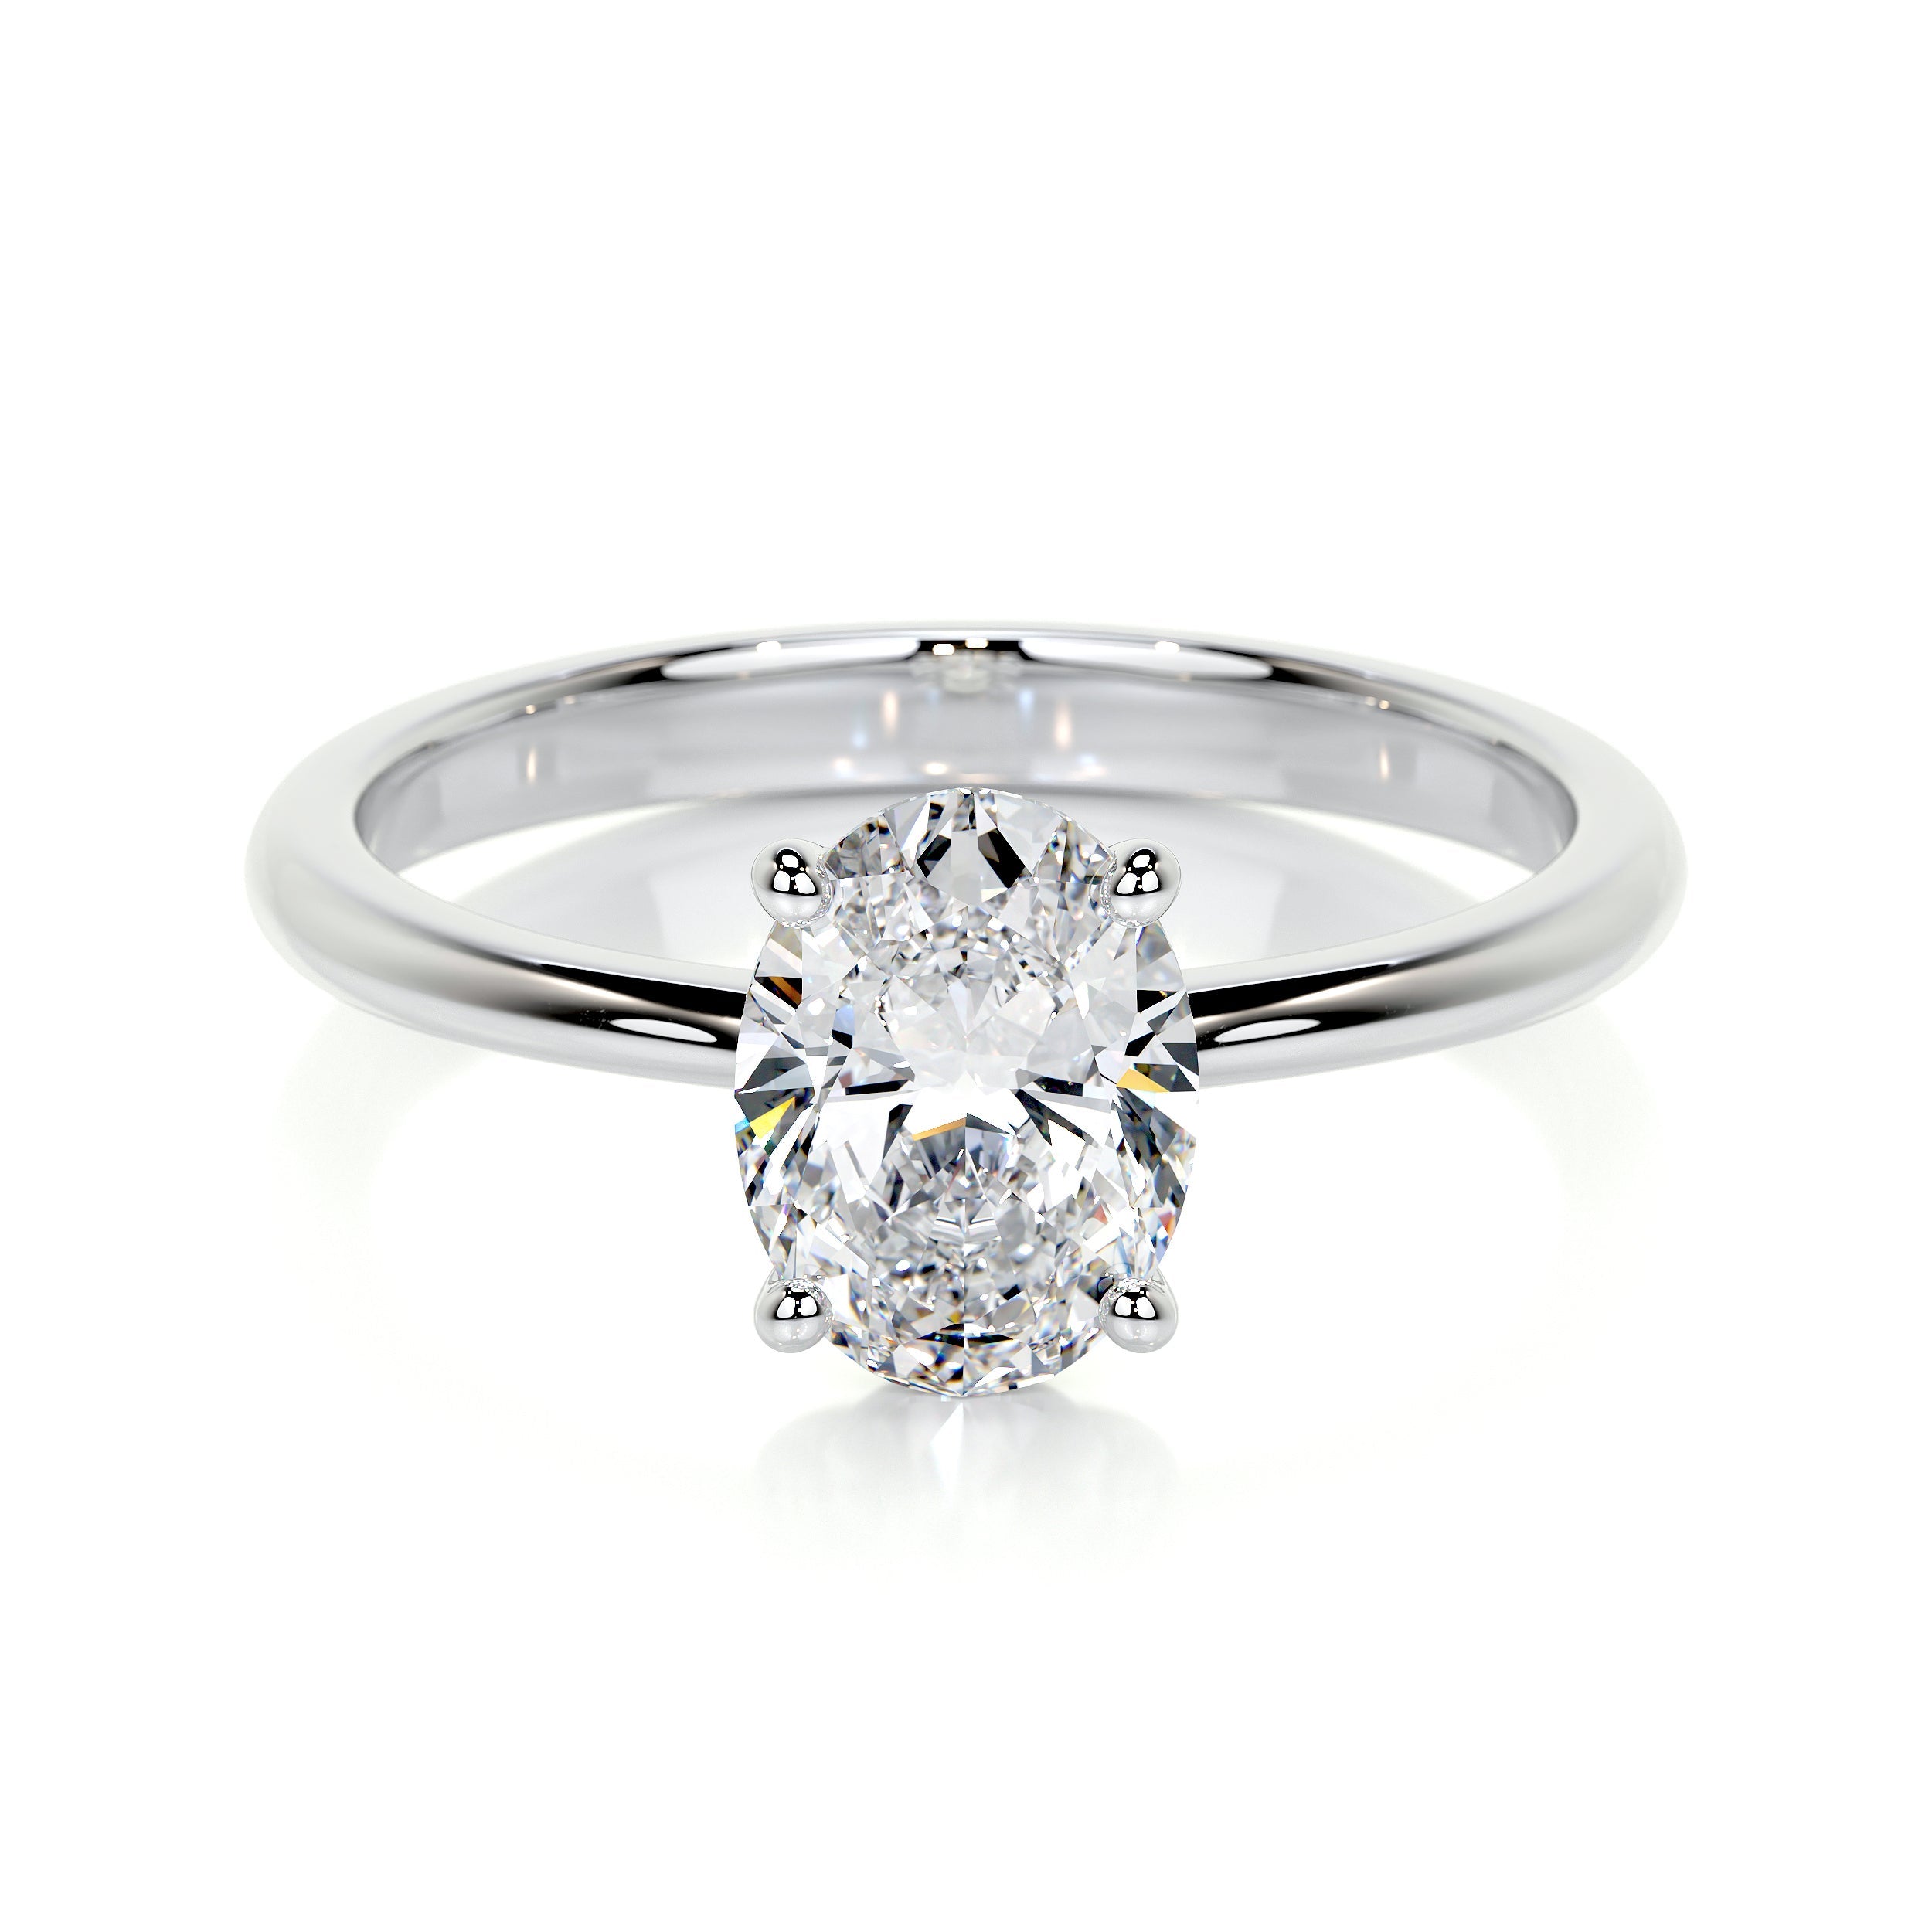 Oval 1 carat Lab Grown Diamond Ring in 14k white gold. Color: white